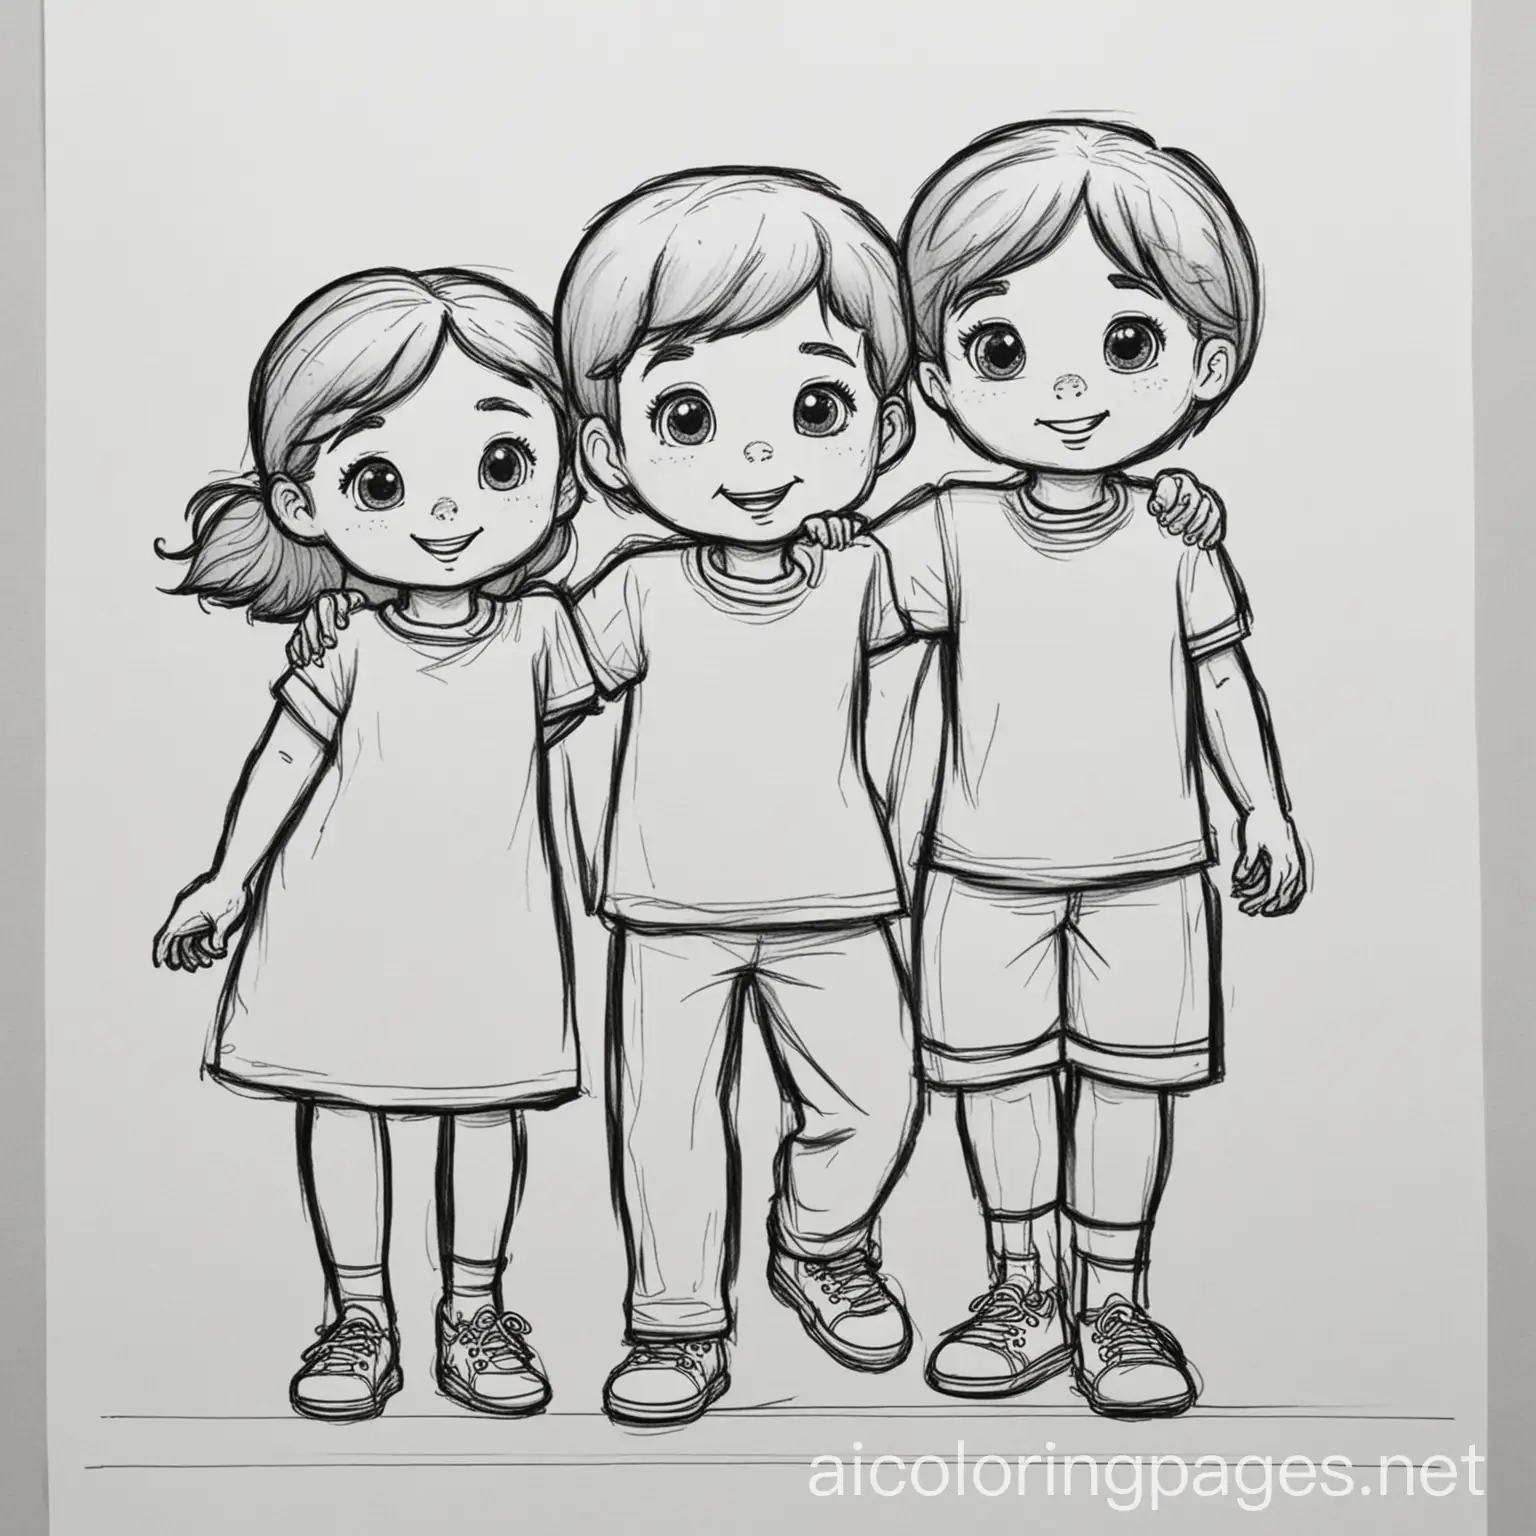 Sibling-Coloring-Page-Big-Sister-and-Two-Brothers-in-Simple-Line-Art